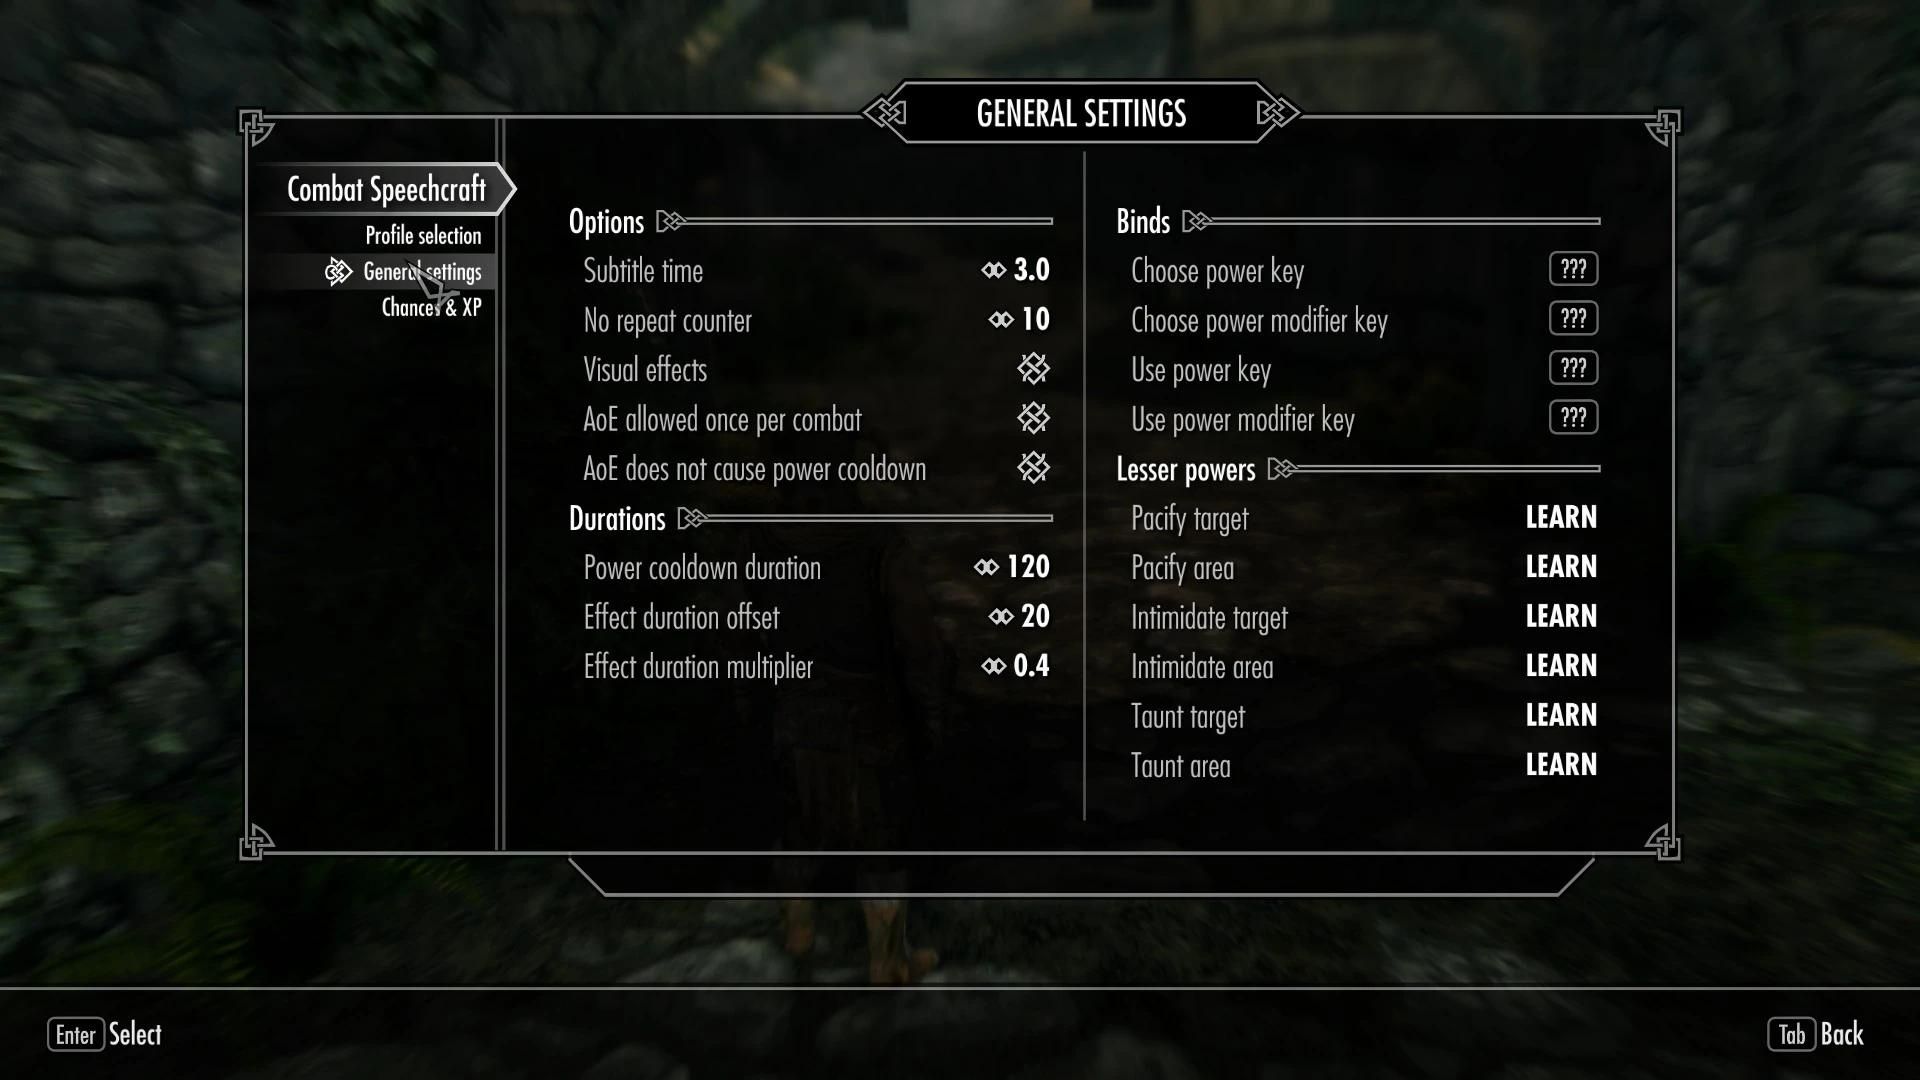 GAMINGbible - This has to be one of the coolest Skyrim mods ever